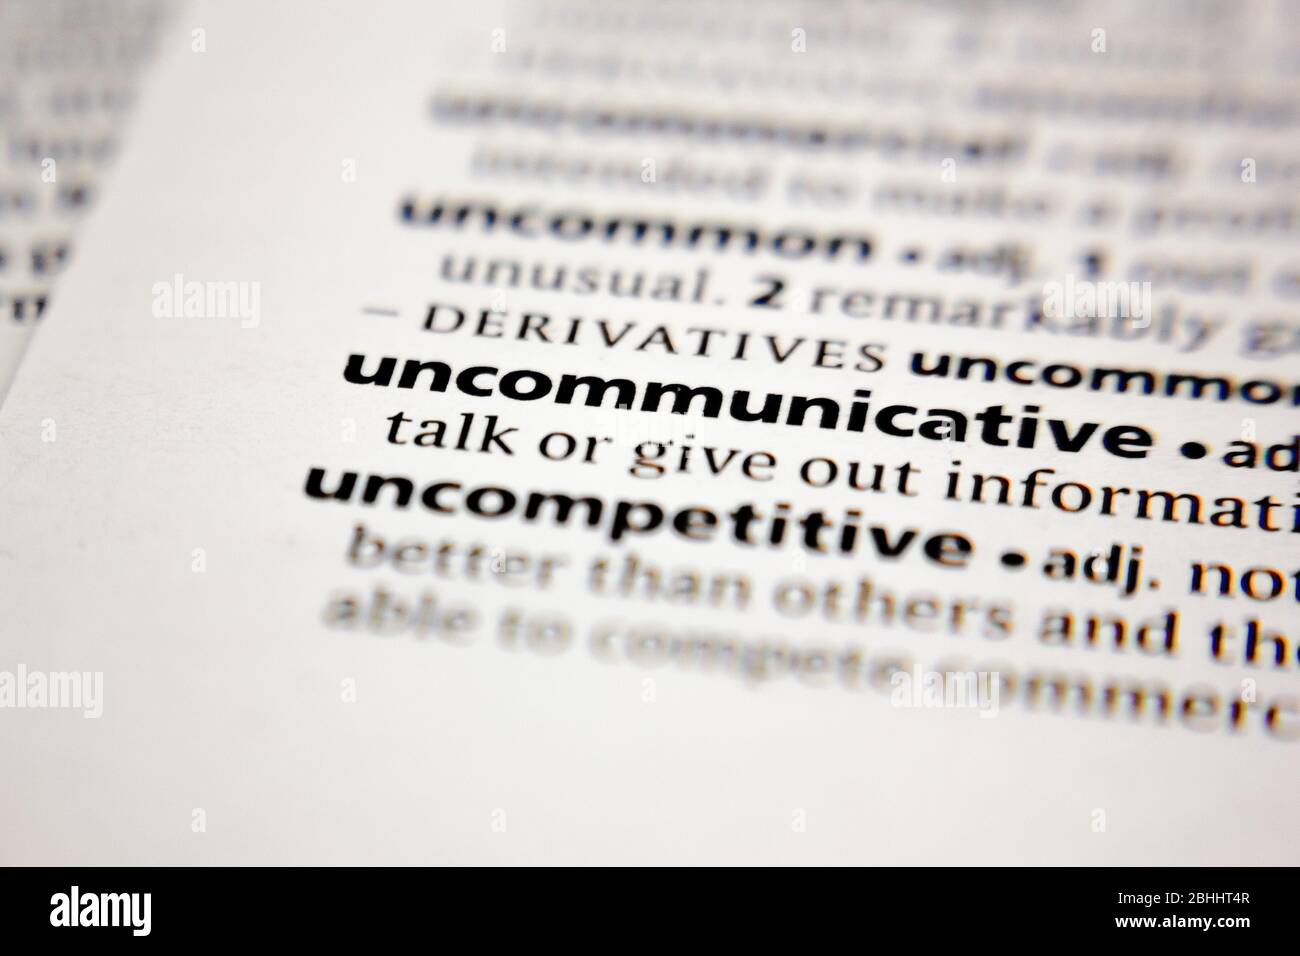 Word or phrase uncommunicative in a dictionary. Stock Photo